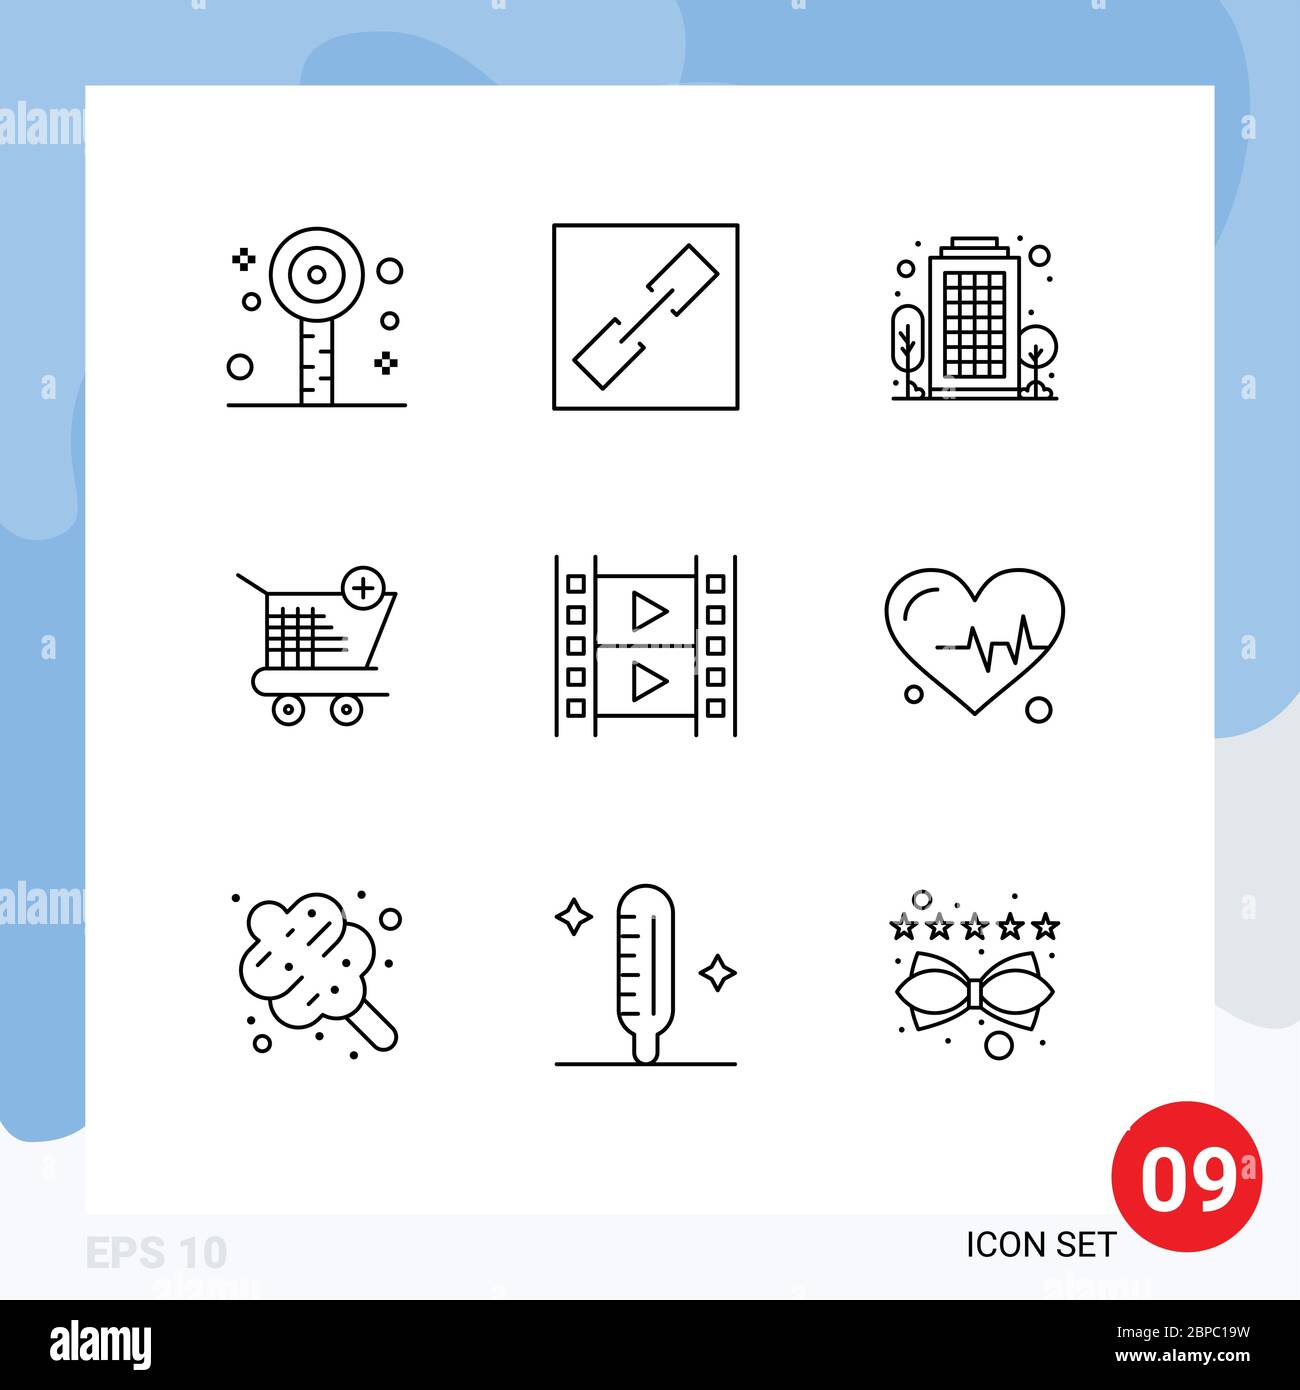 Pictogram Set of 9 Simple Outlines of movie, film, city, shopping, ecommerce Editable Vector Design Elements Stock Vector